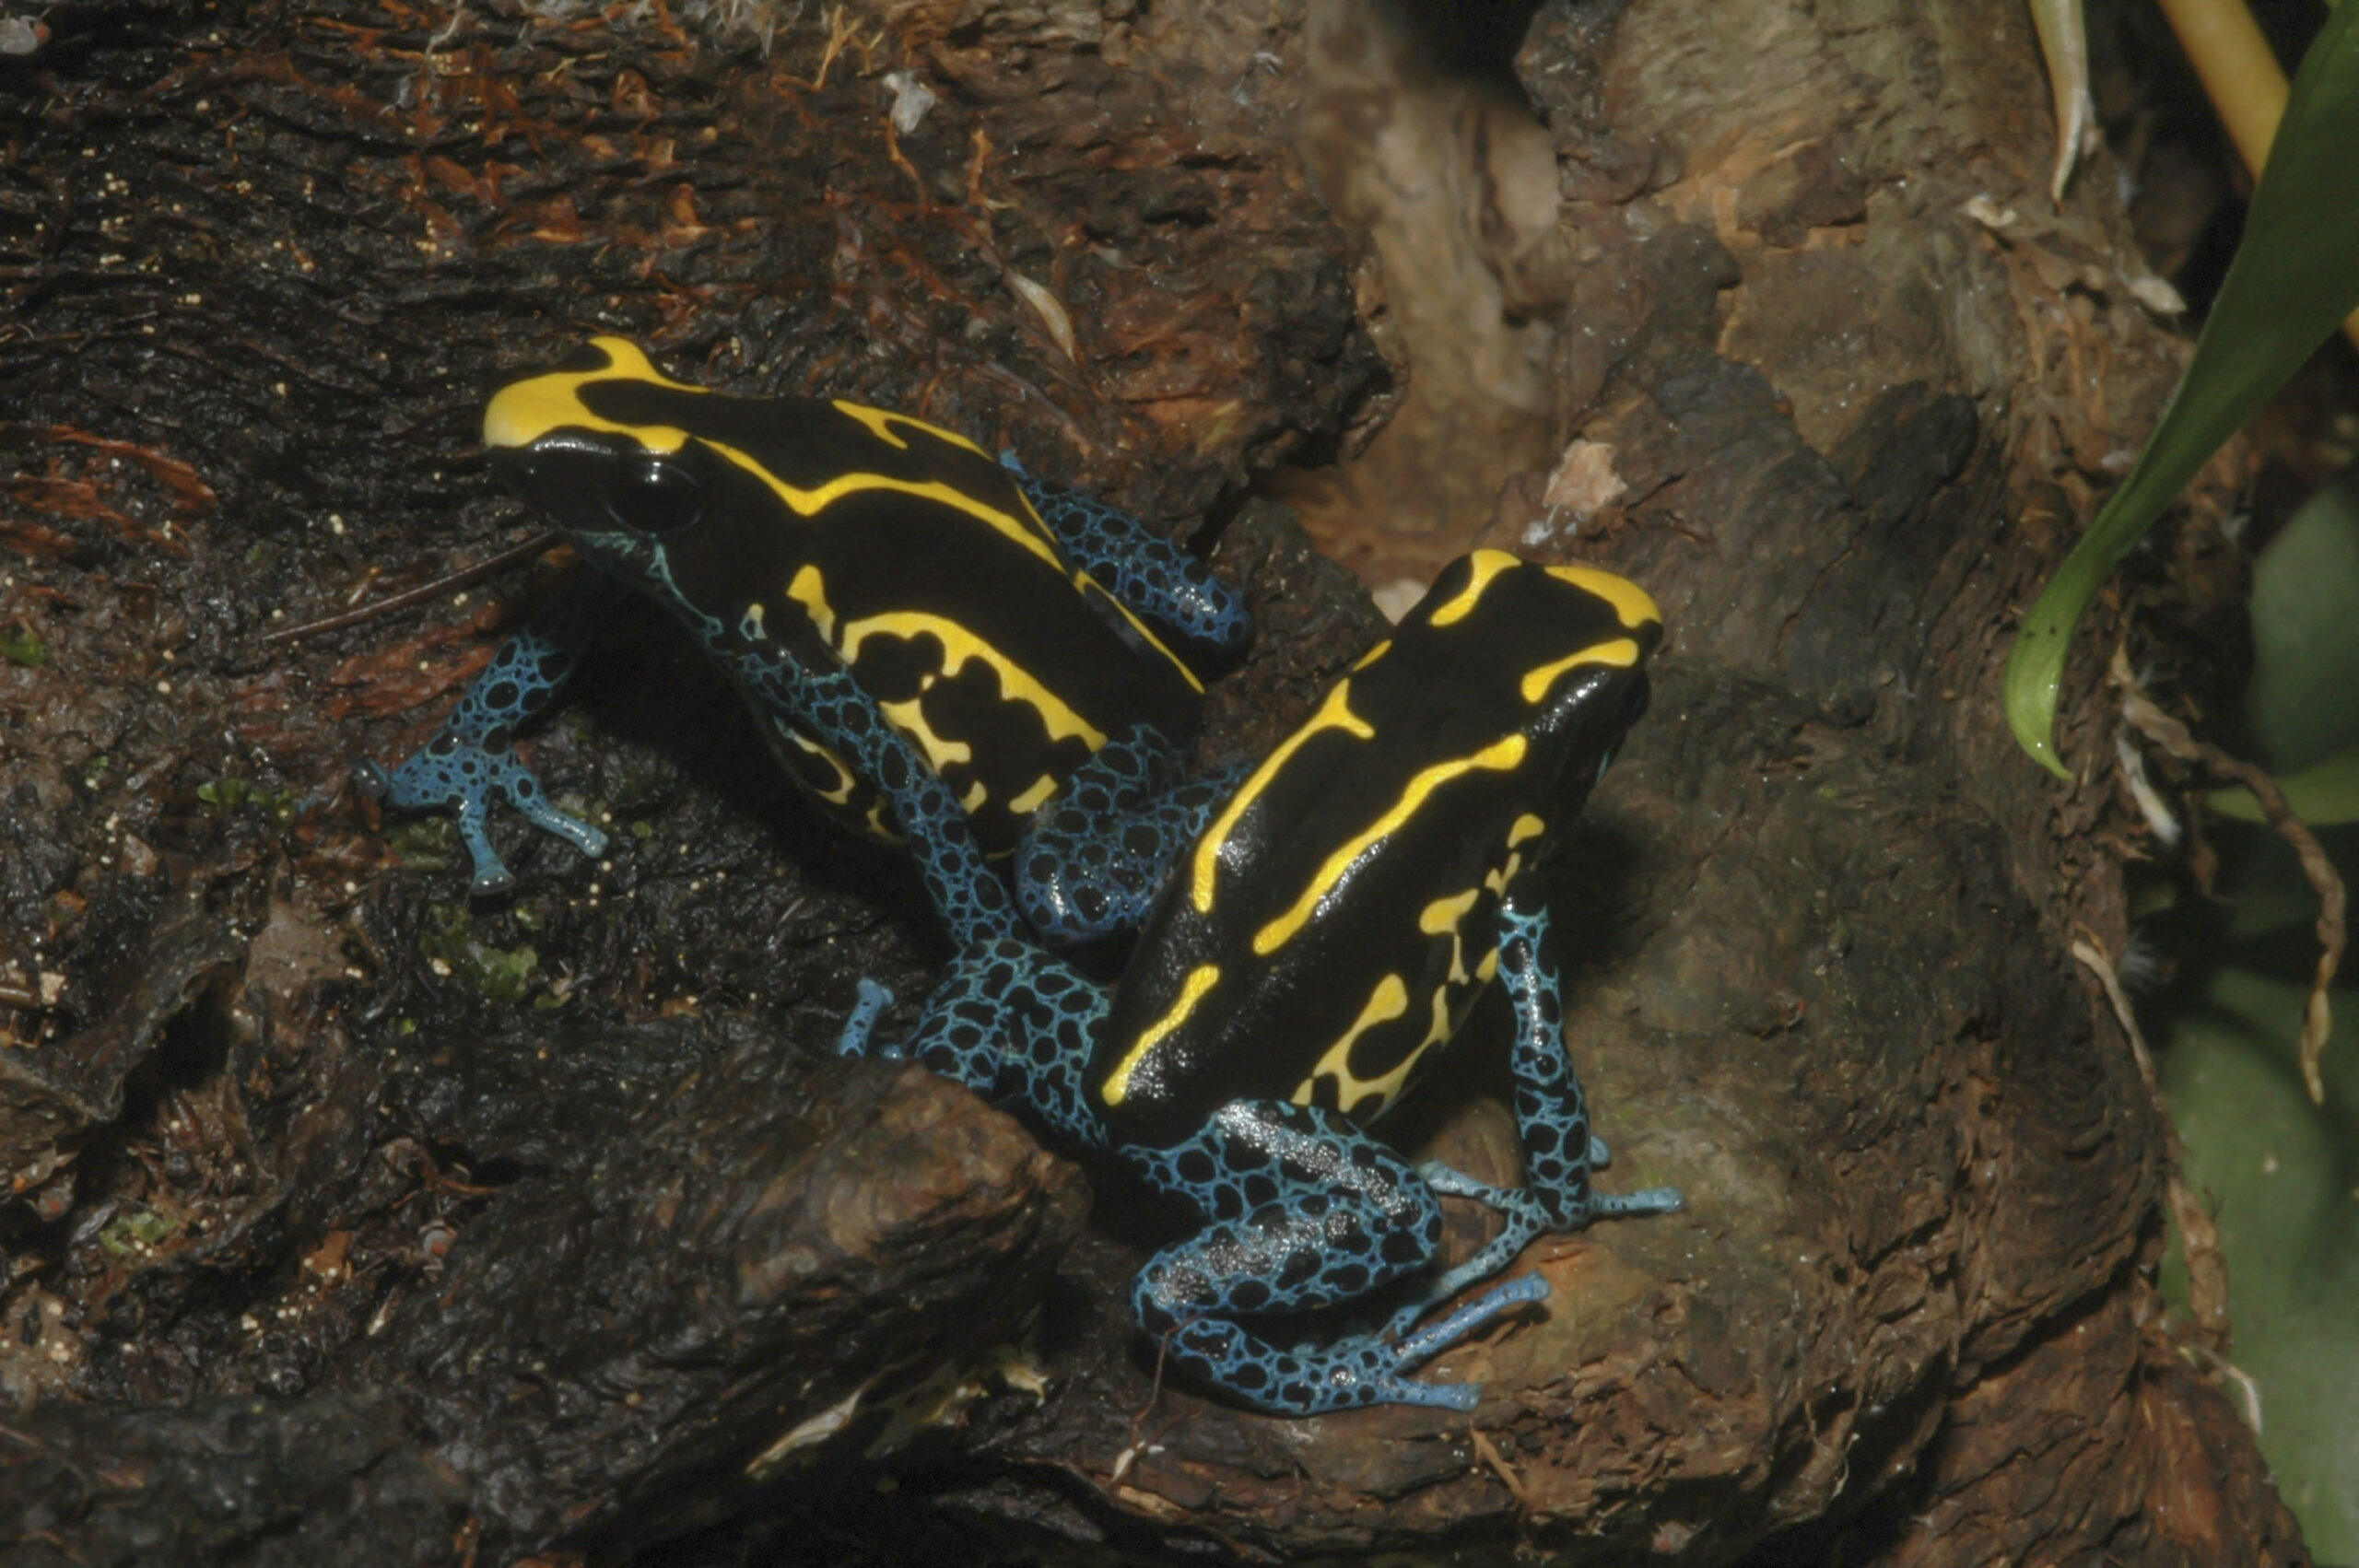 Creature Feature: Dyeing Poison Dart Frog